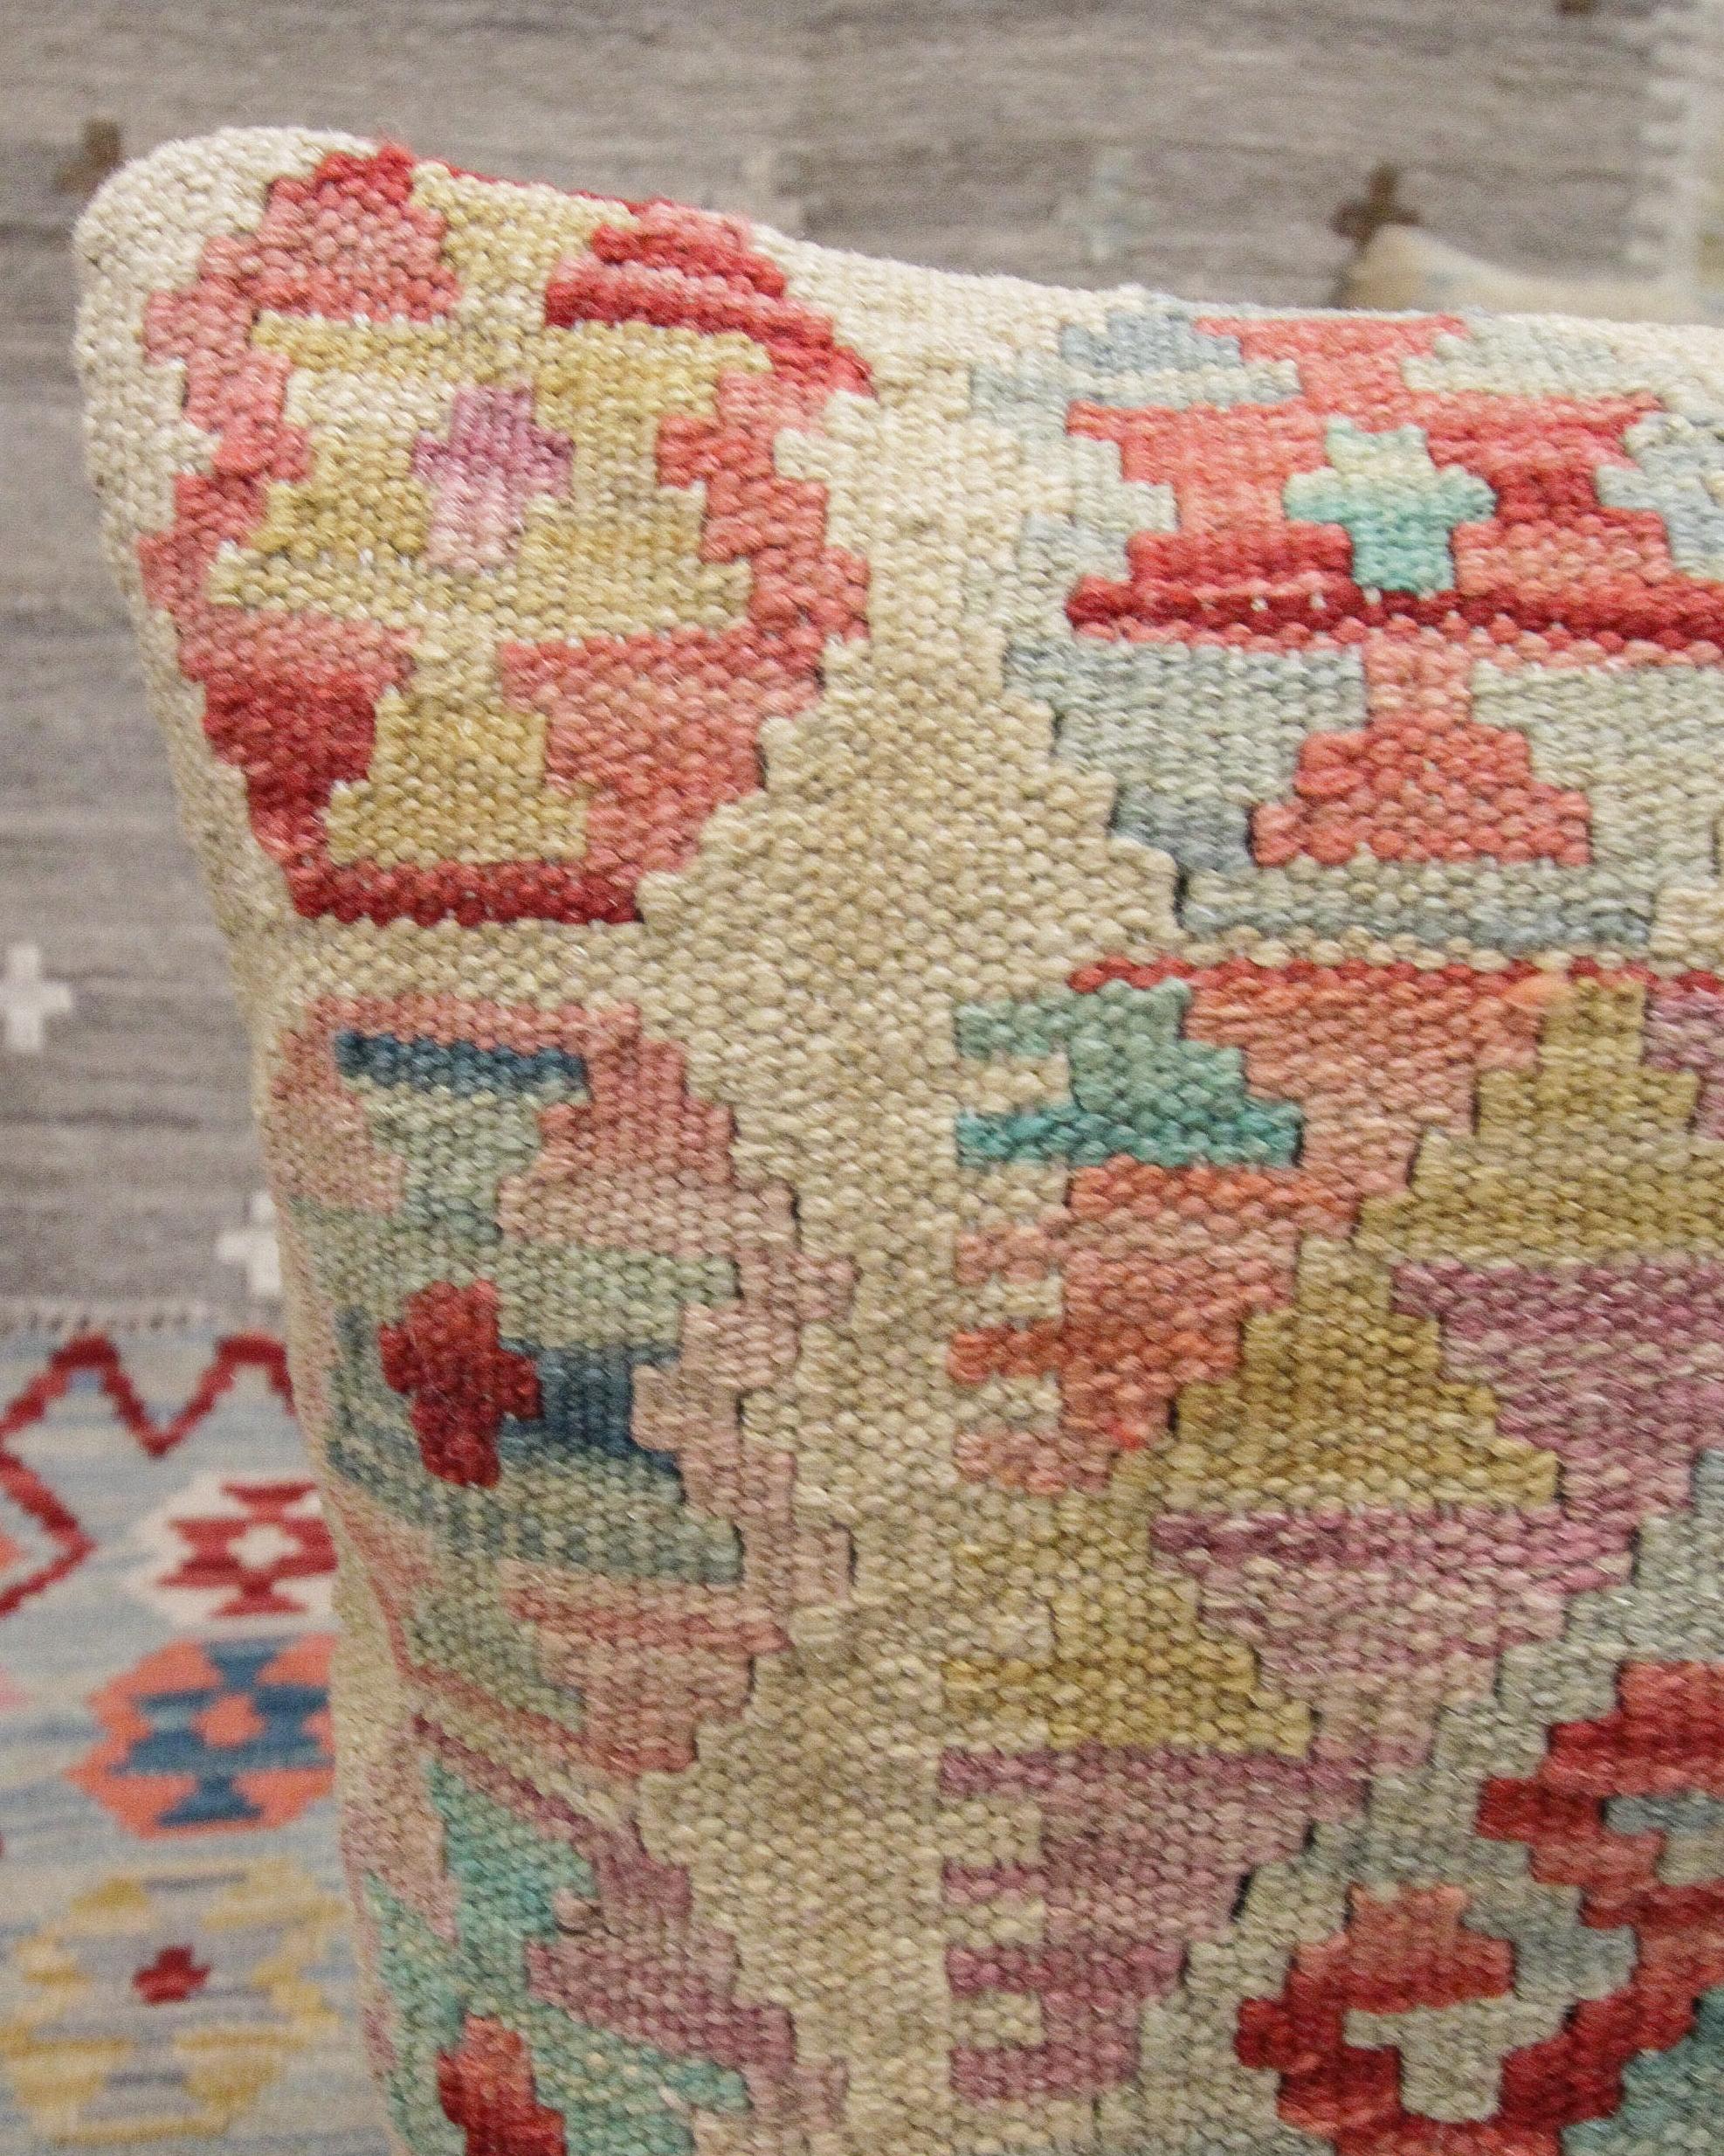 Afghan Kilim Cushion Cover Rustic Beige Pink Wool New Handmade Scatter Pillow